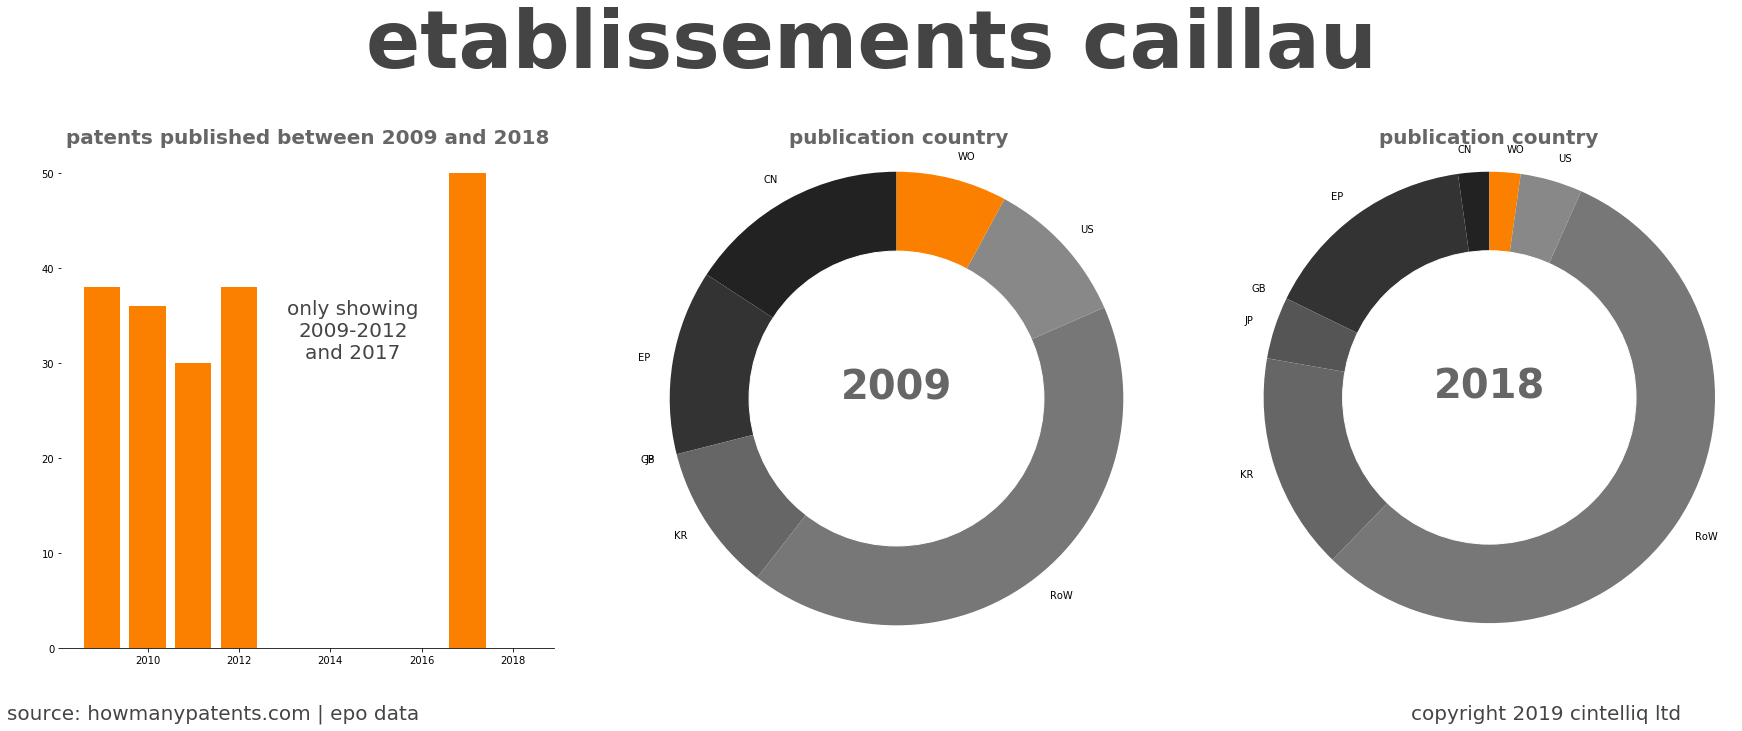 summary of patents for Etablissements Caillau